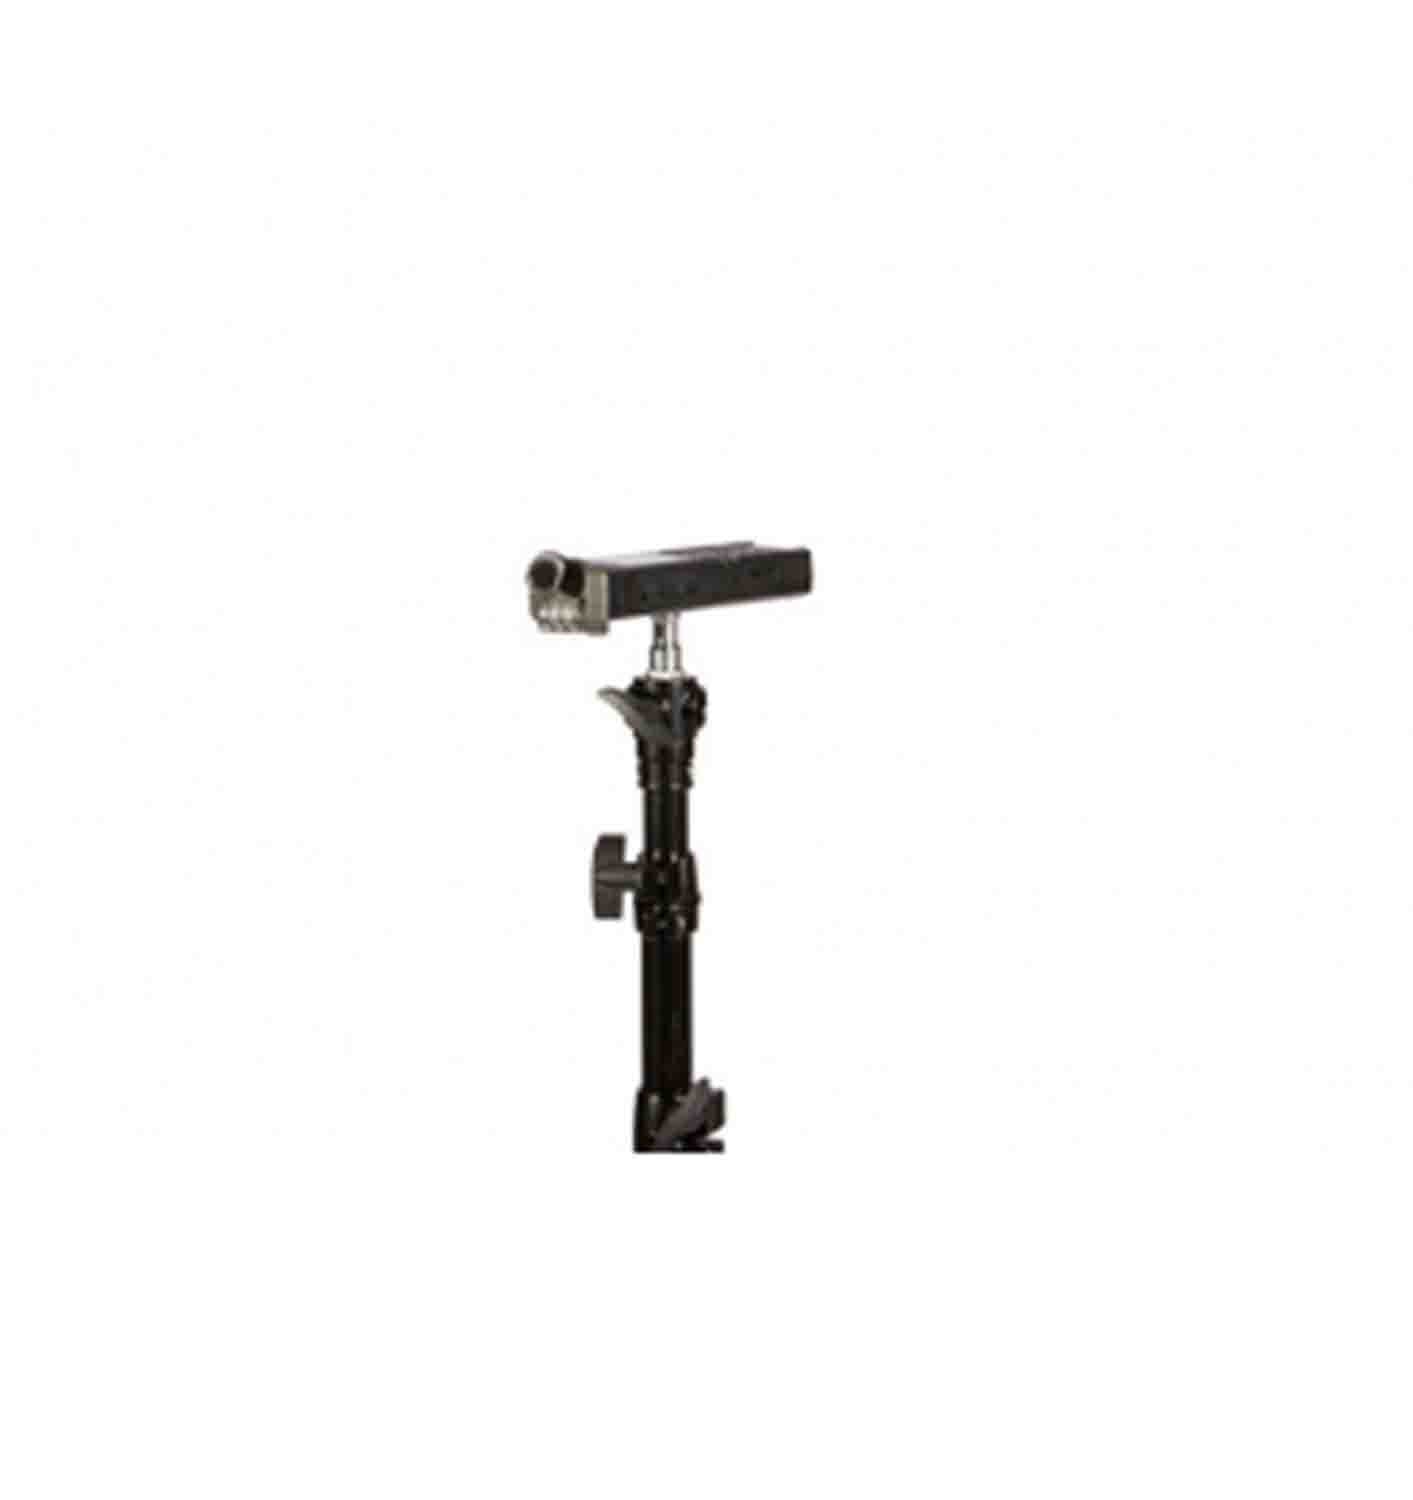 Onstage LS-MS7620, 13 Inch Tripod Lighting and Mic Stand - Hollywood DJ